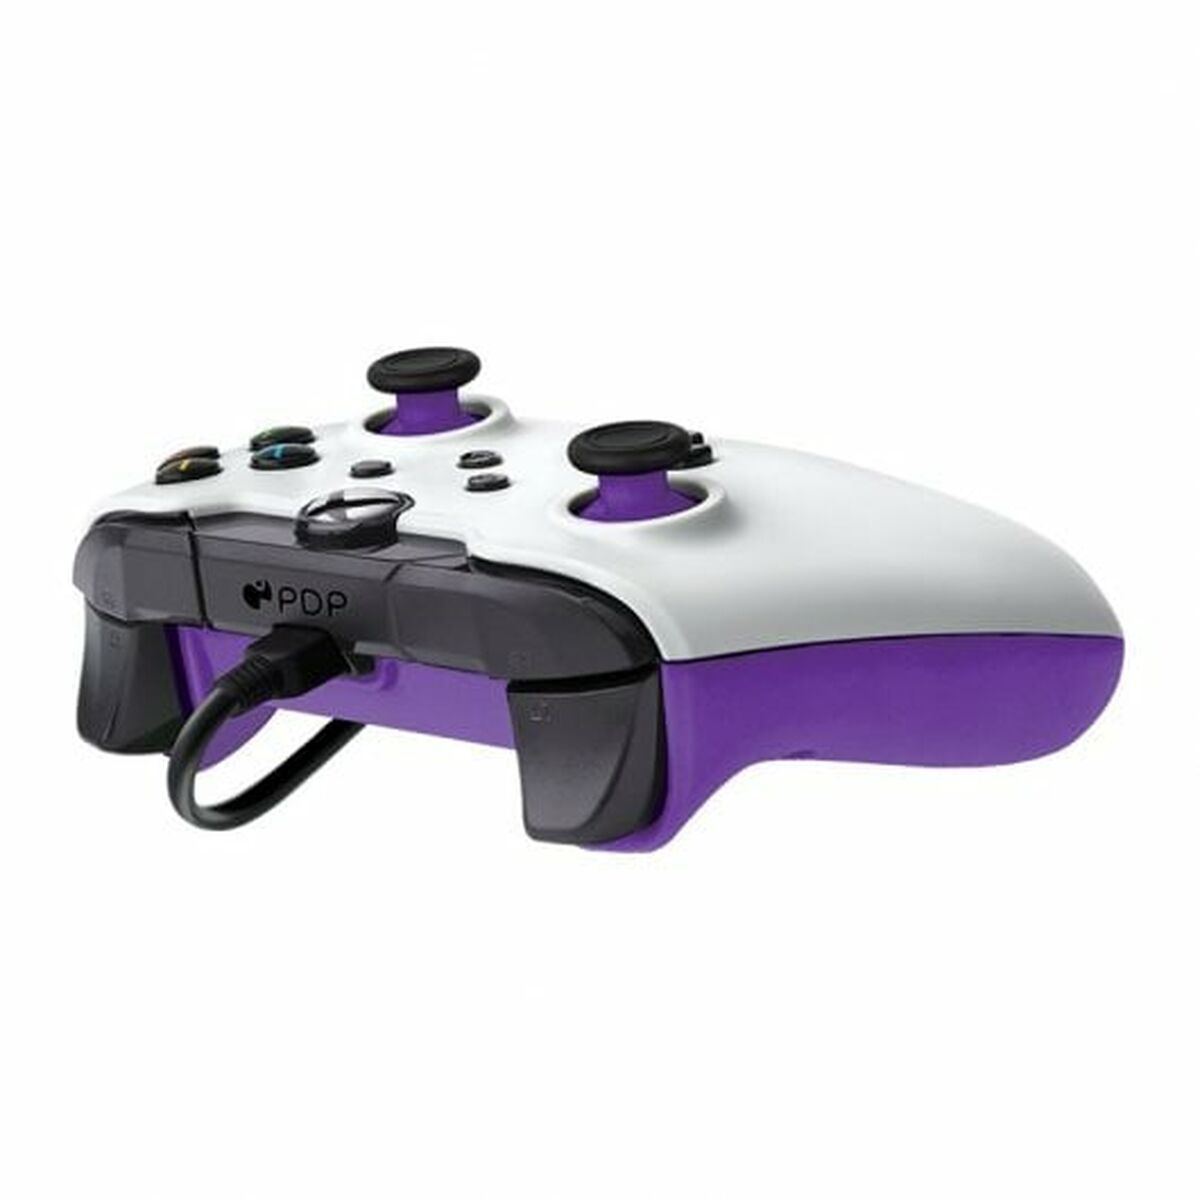 Gaming Controller PDP Weiß